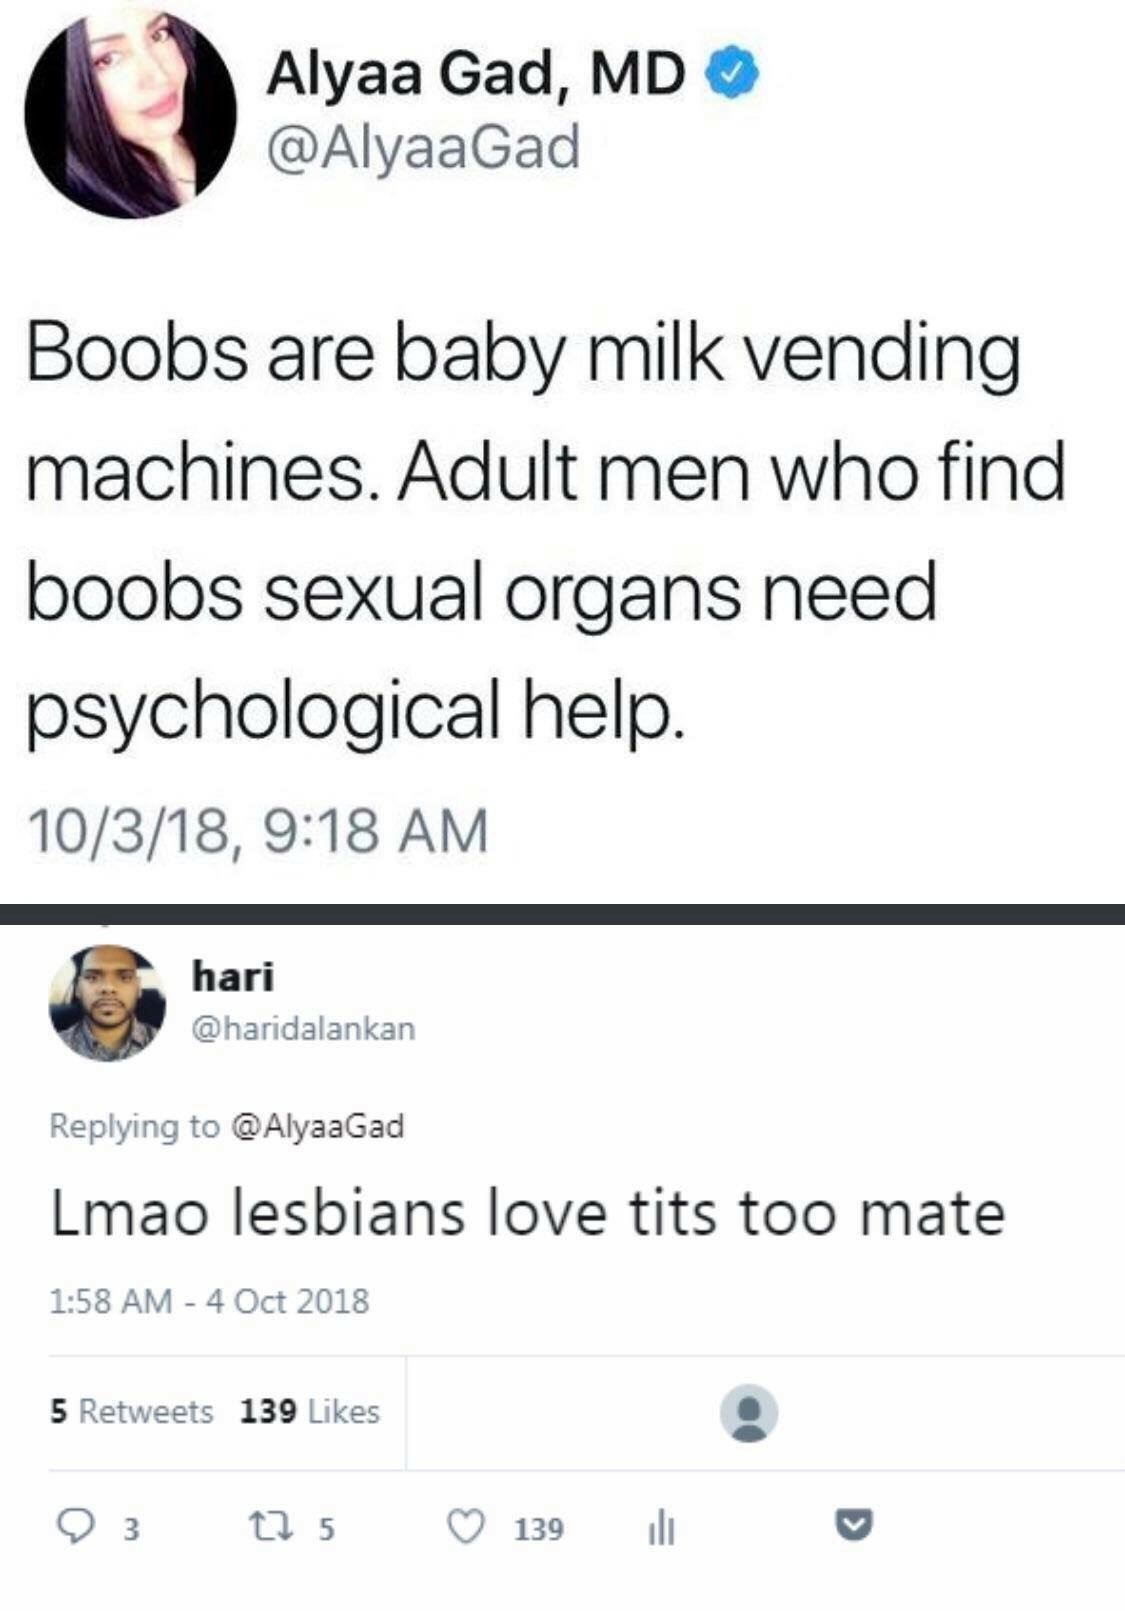 angle - Alyaa Gad, Md Boobs are baby milk vending machines. Adult men who find boobs sexual organs need psychological help. 10318, hari Lmao lesbians love tits too mate 5 139 23 125 139 ili